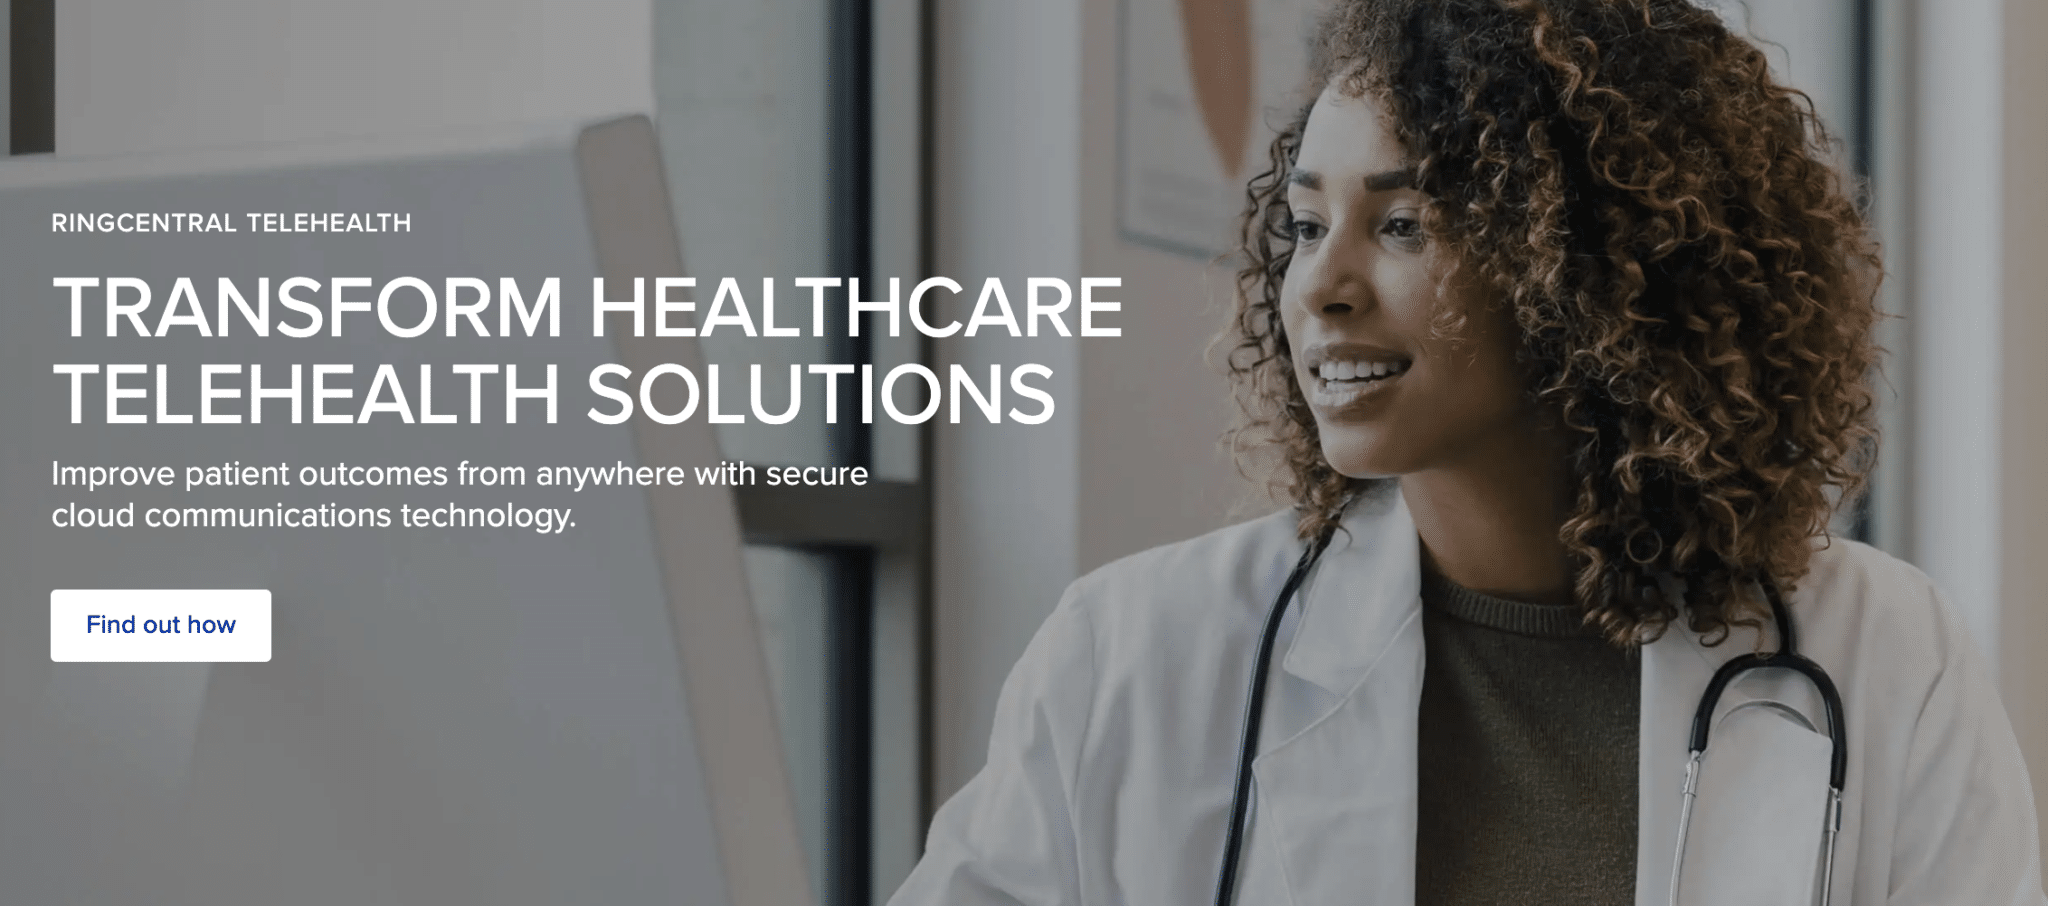 RingCentral Telehealth Solutions